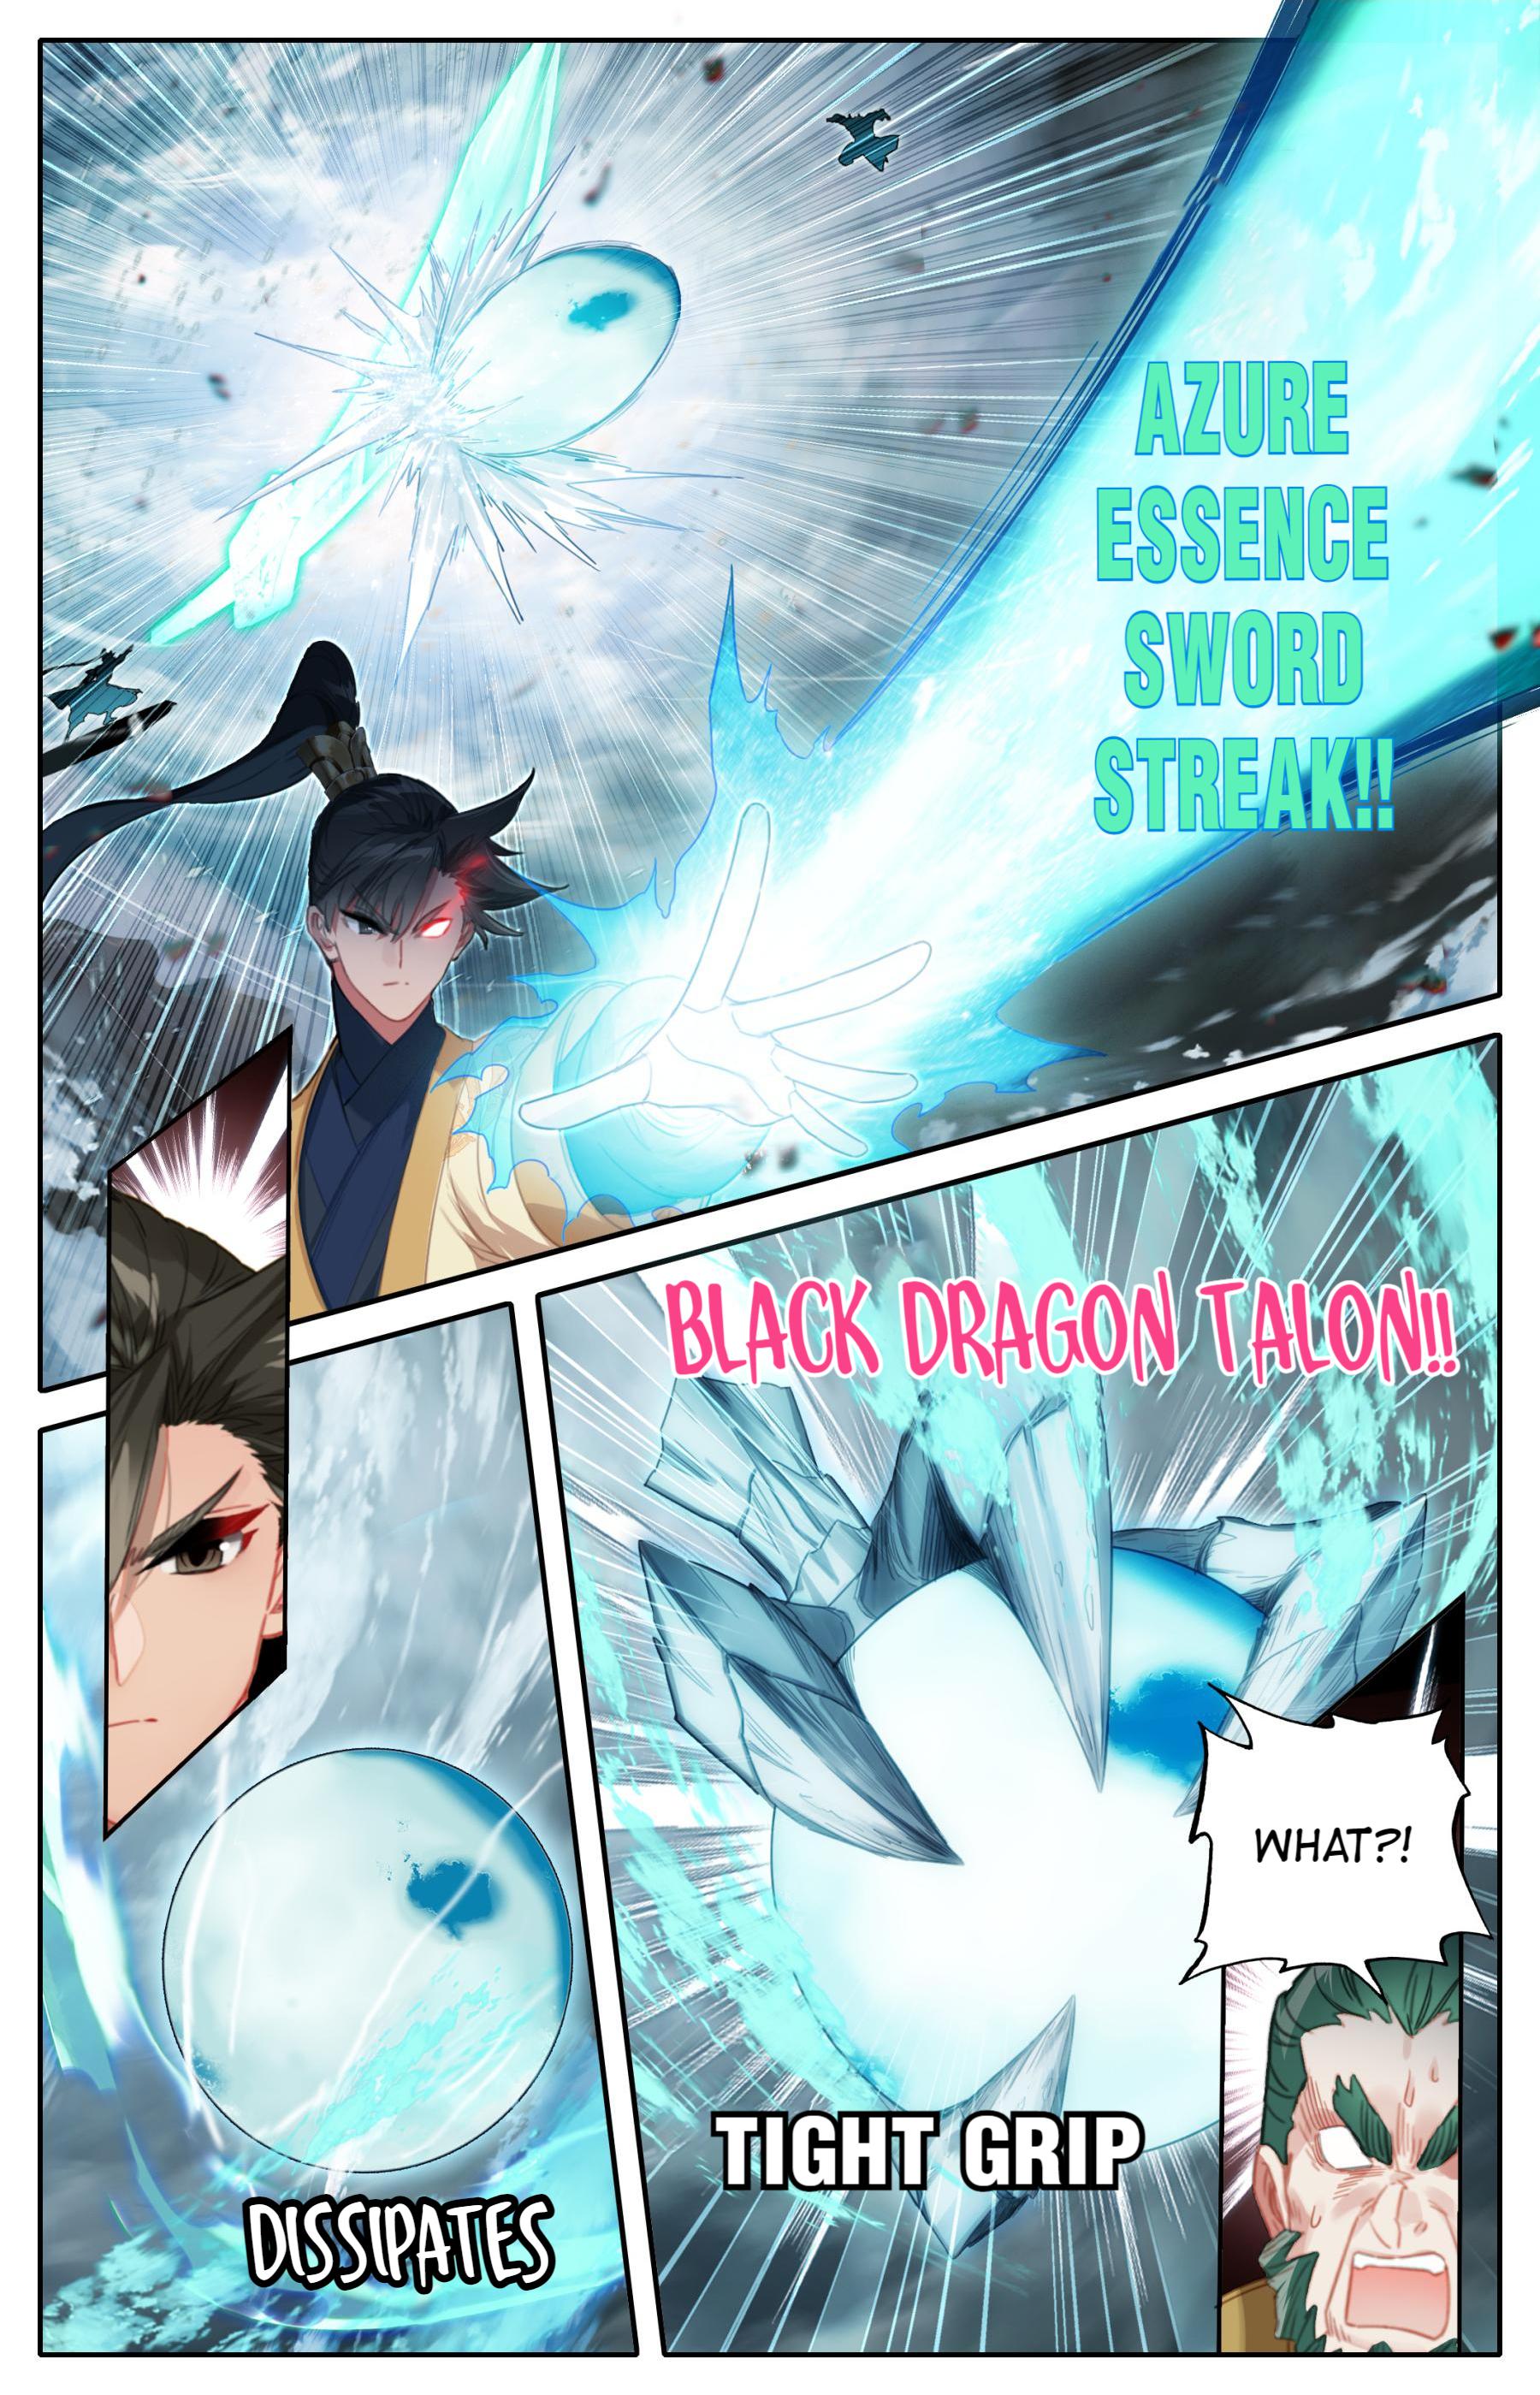 A Record Of A Mortal's Journey To Immortality Chapter 130